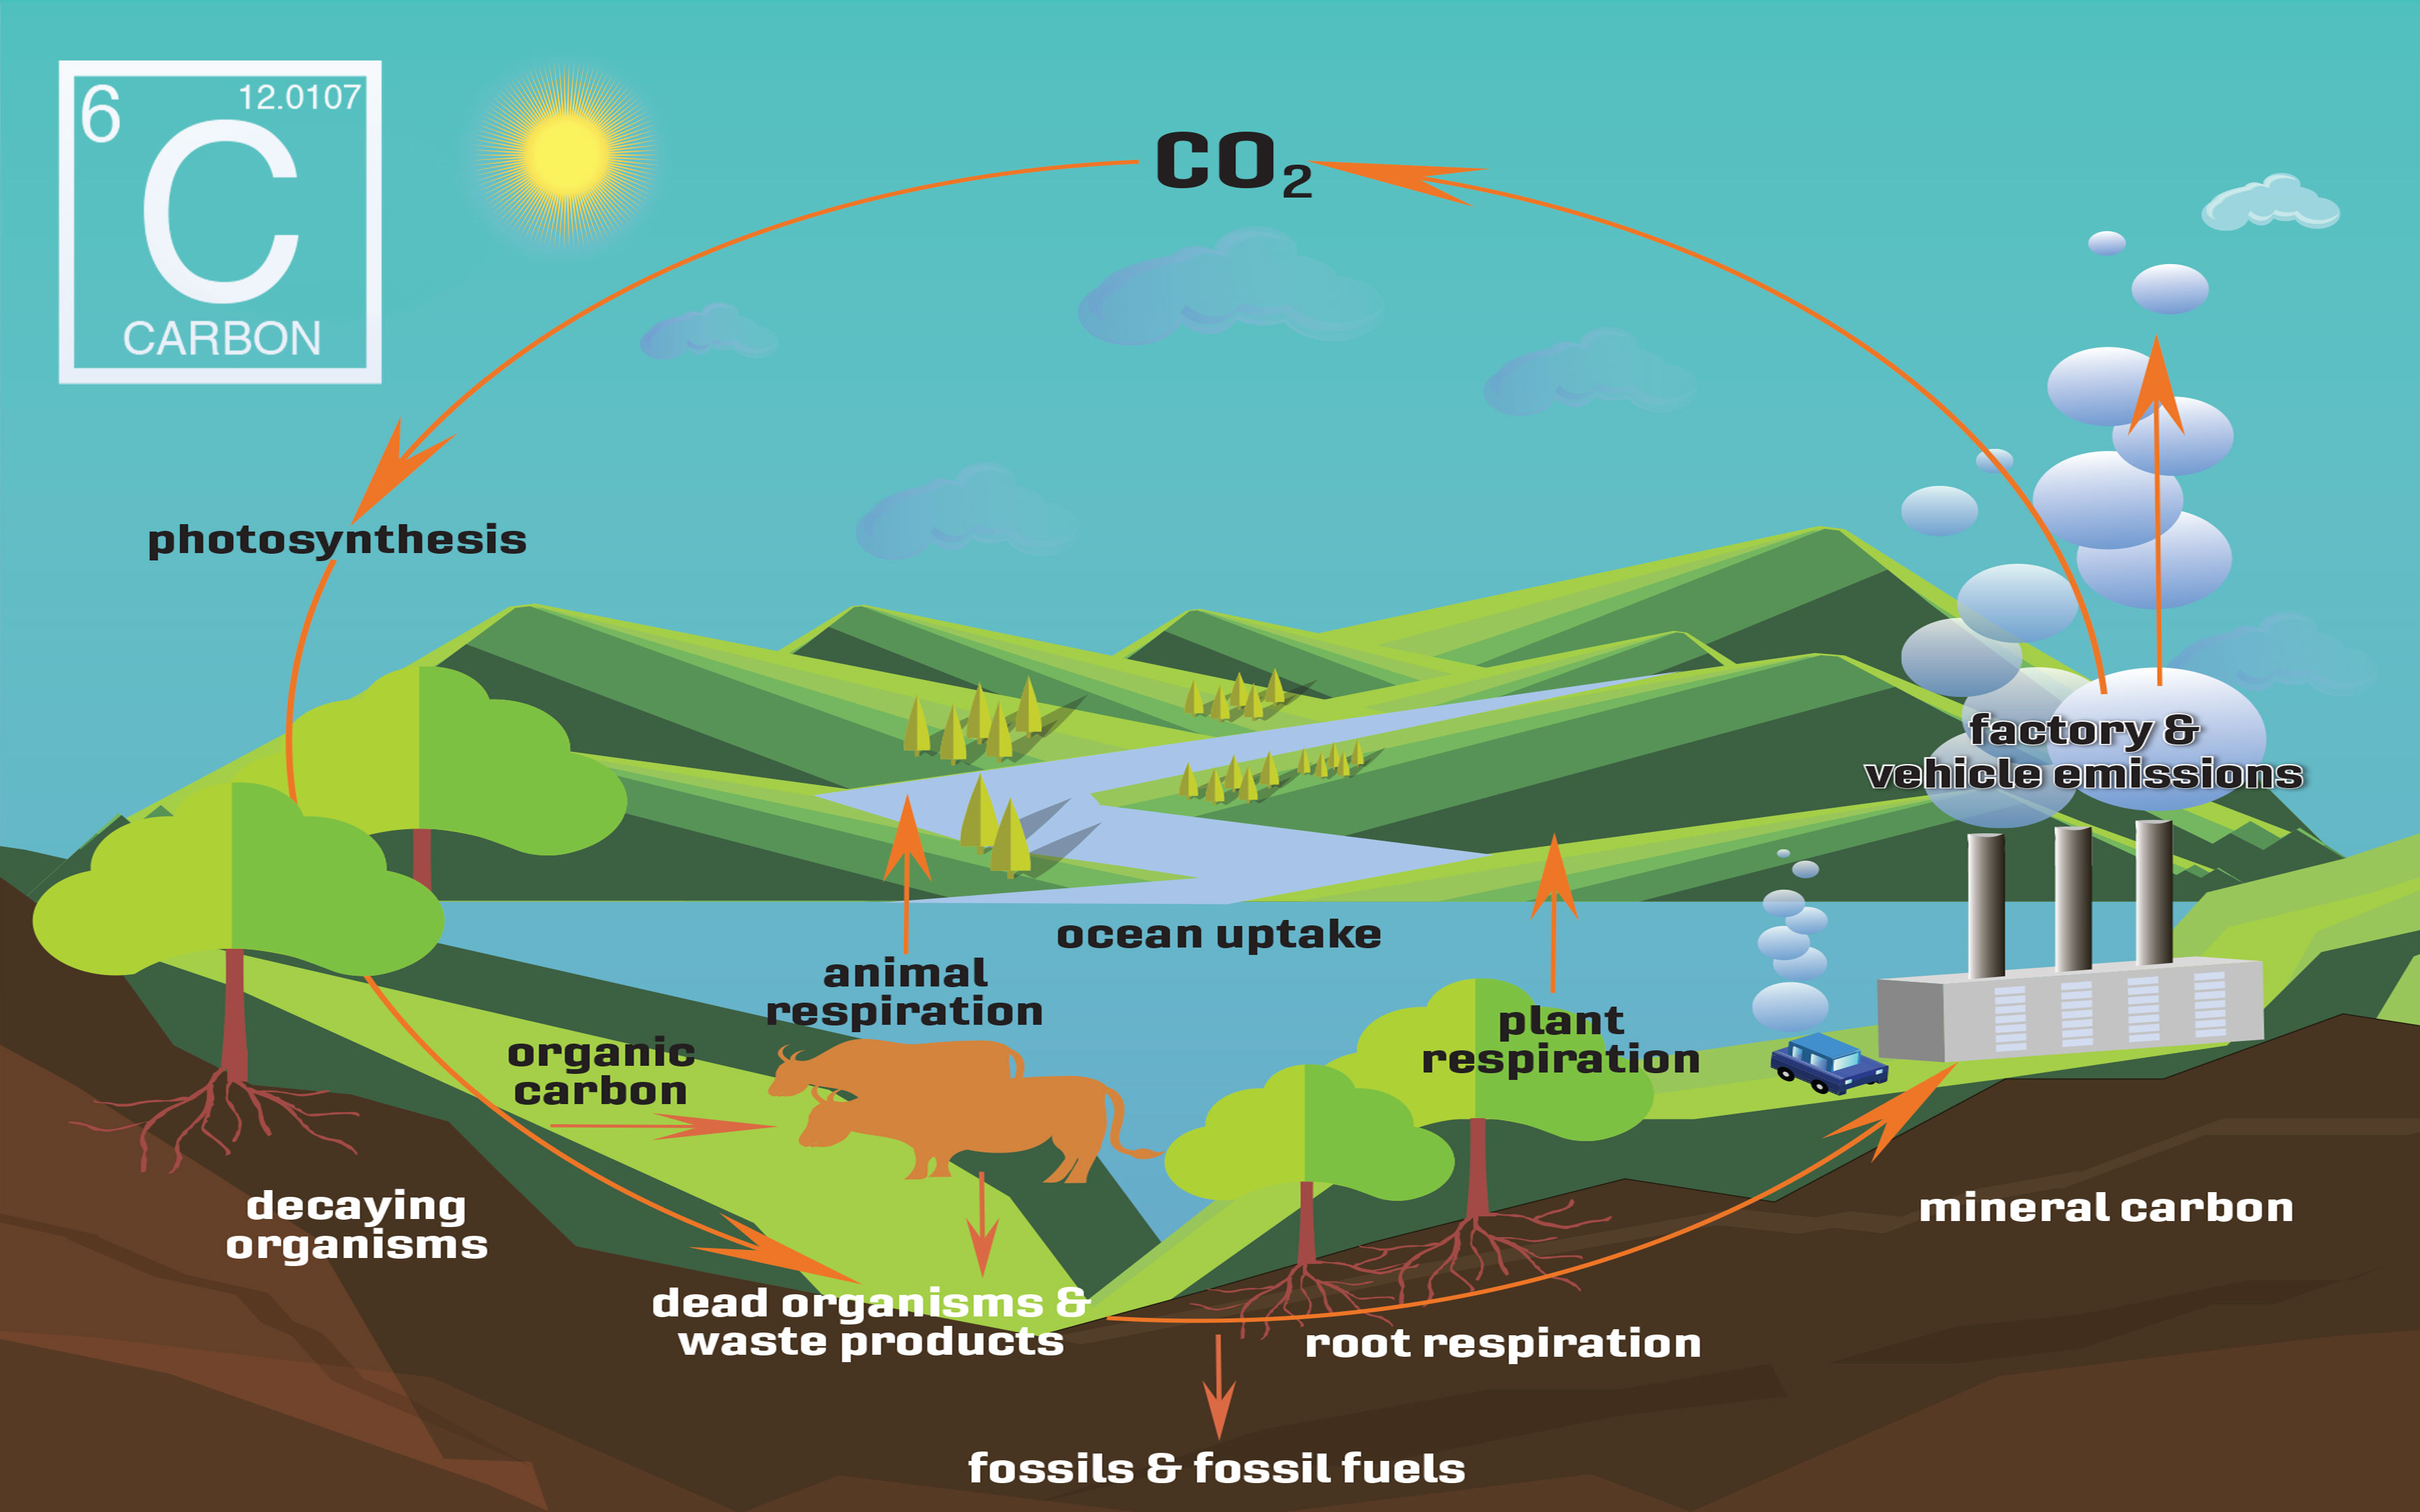 C O 2 is captured by plants from the atmosphere during the photosynthesis process. Organisms capture the carbon from plants. C O 2 is released into the atmosphere by animal respiration as well as factory and vehicle emissions.